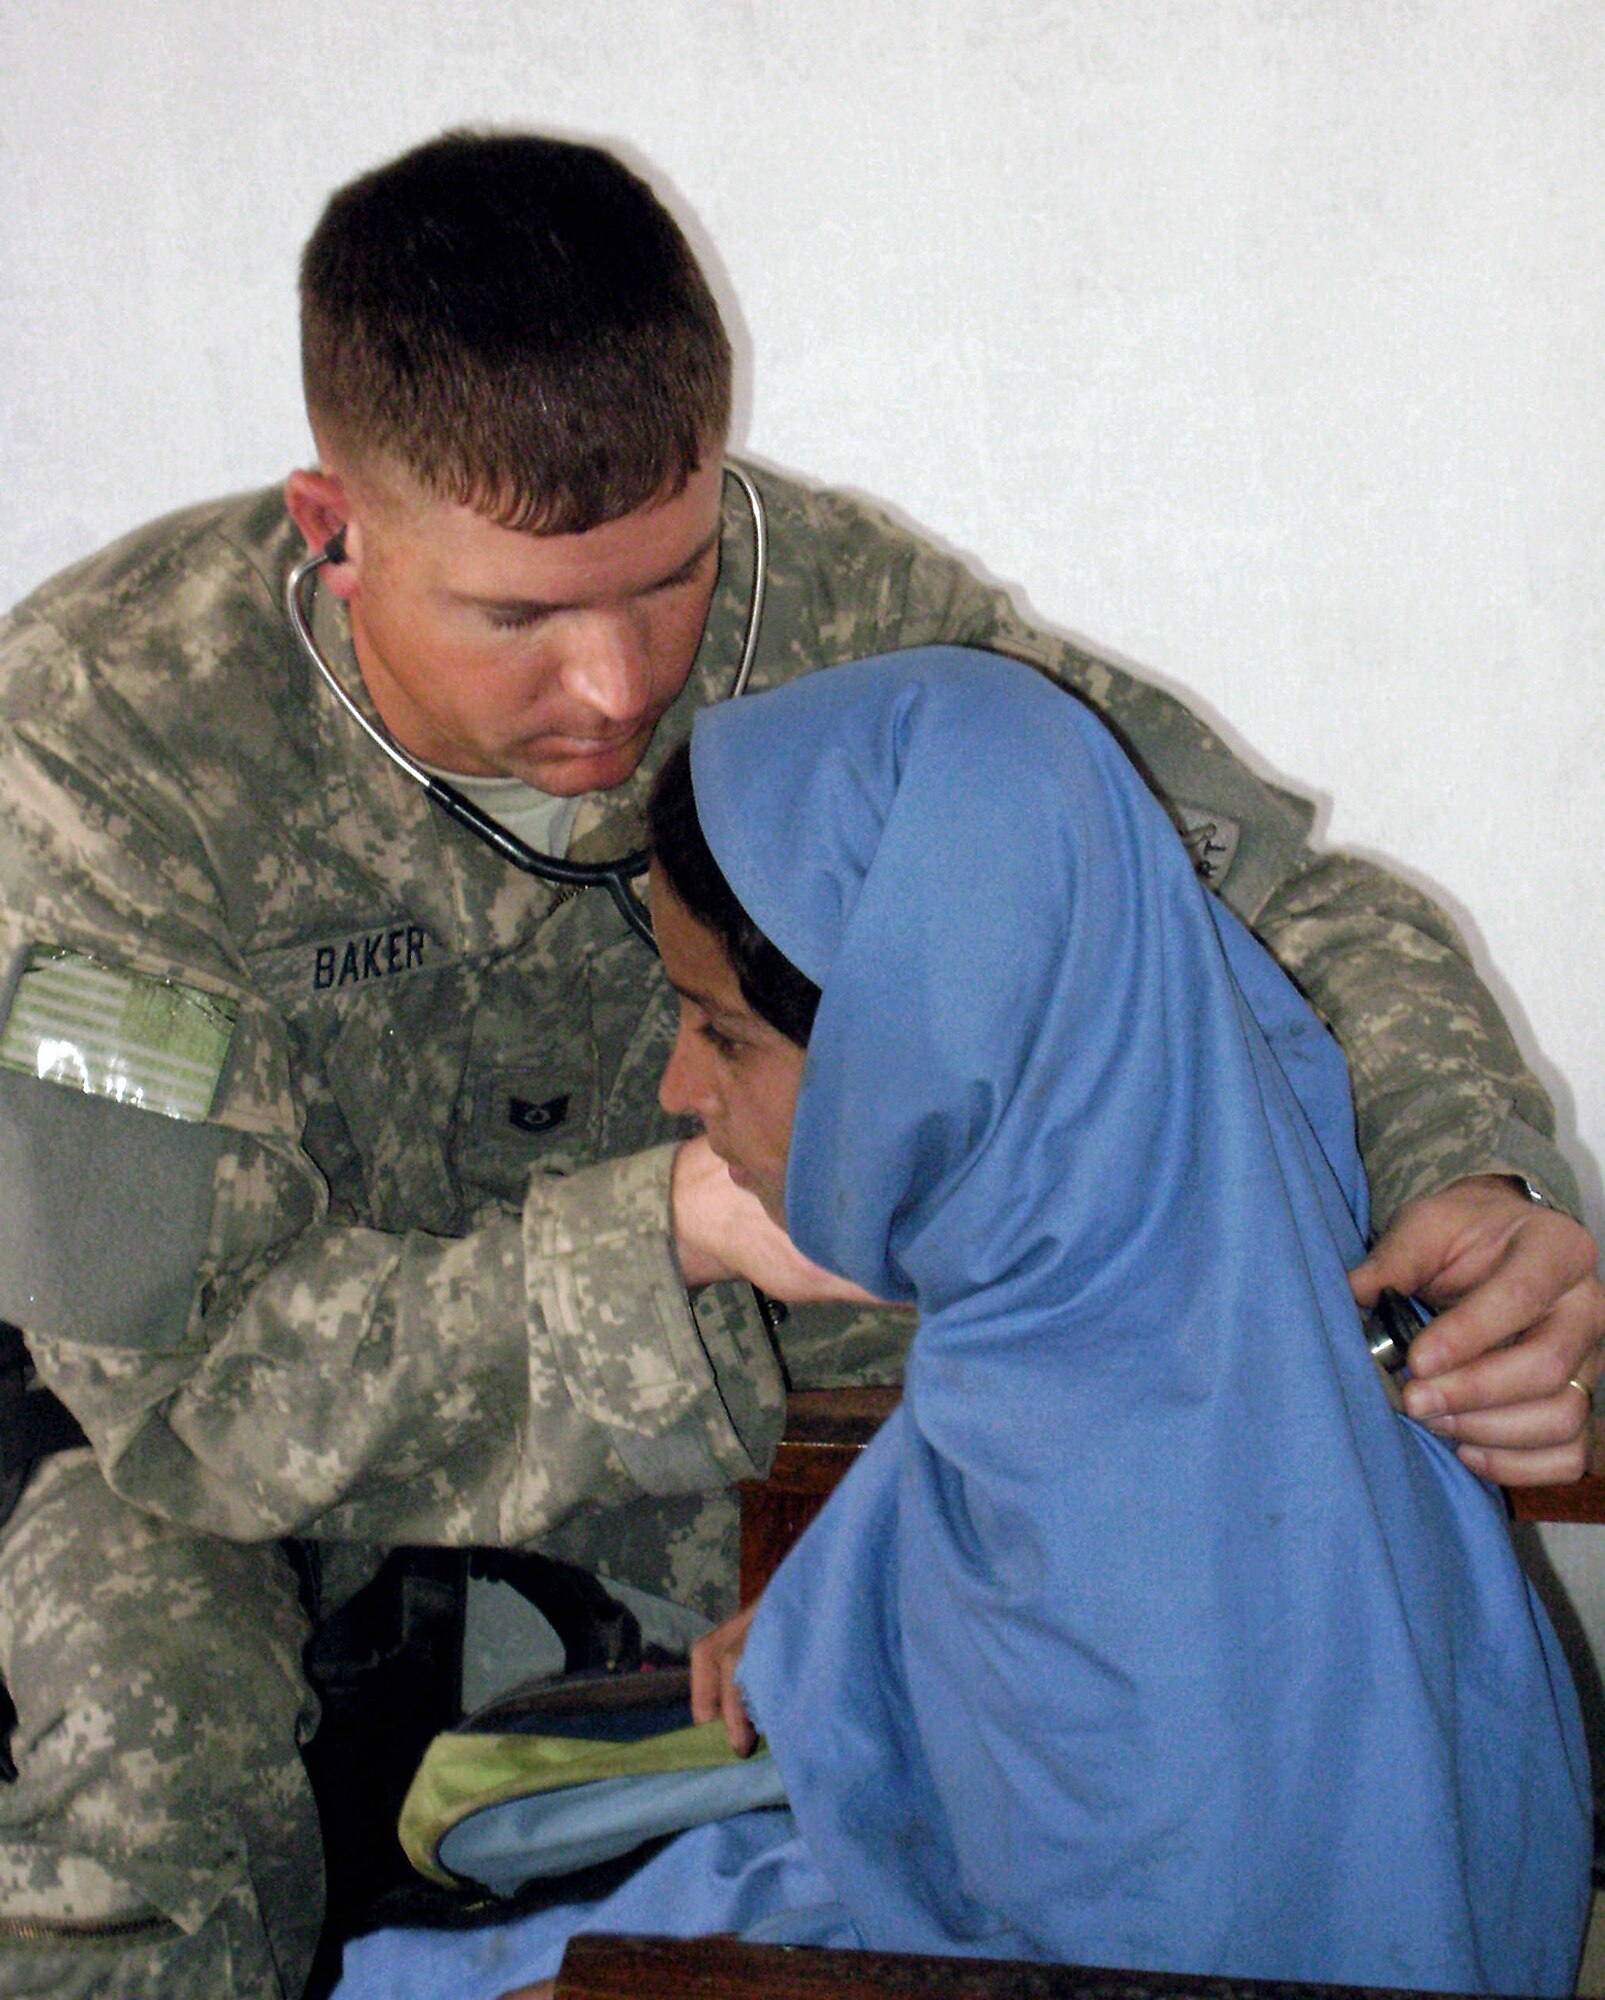 Technical Sgt. Kyle Baker checks the breathing of a student at the Hope of Mother Clinic Feb. 24 in the Surkh Rod District of Afghanistan. Sergeant Baker is a medic with the provincial reconstruction team in Afghanistan's Nangarhar province. (U.S. Air Force photo/Capt. Dustin Hart) 
